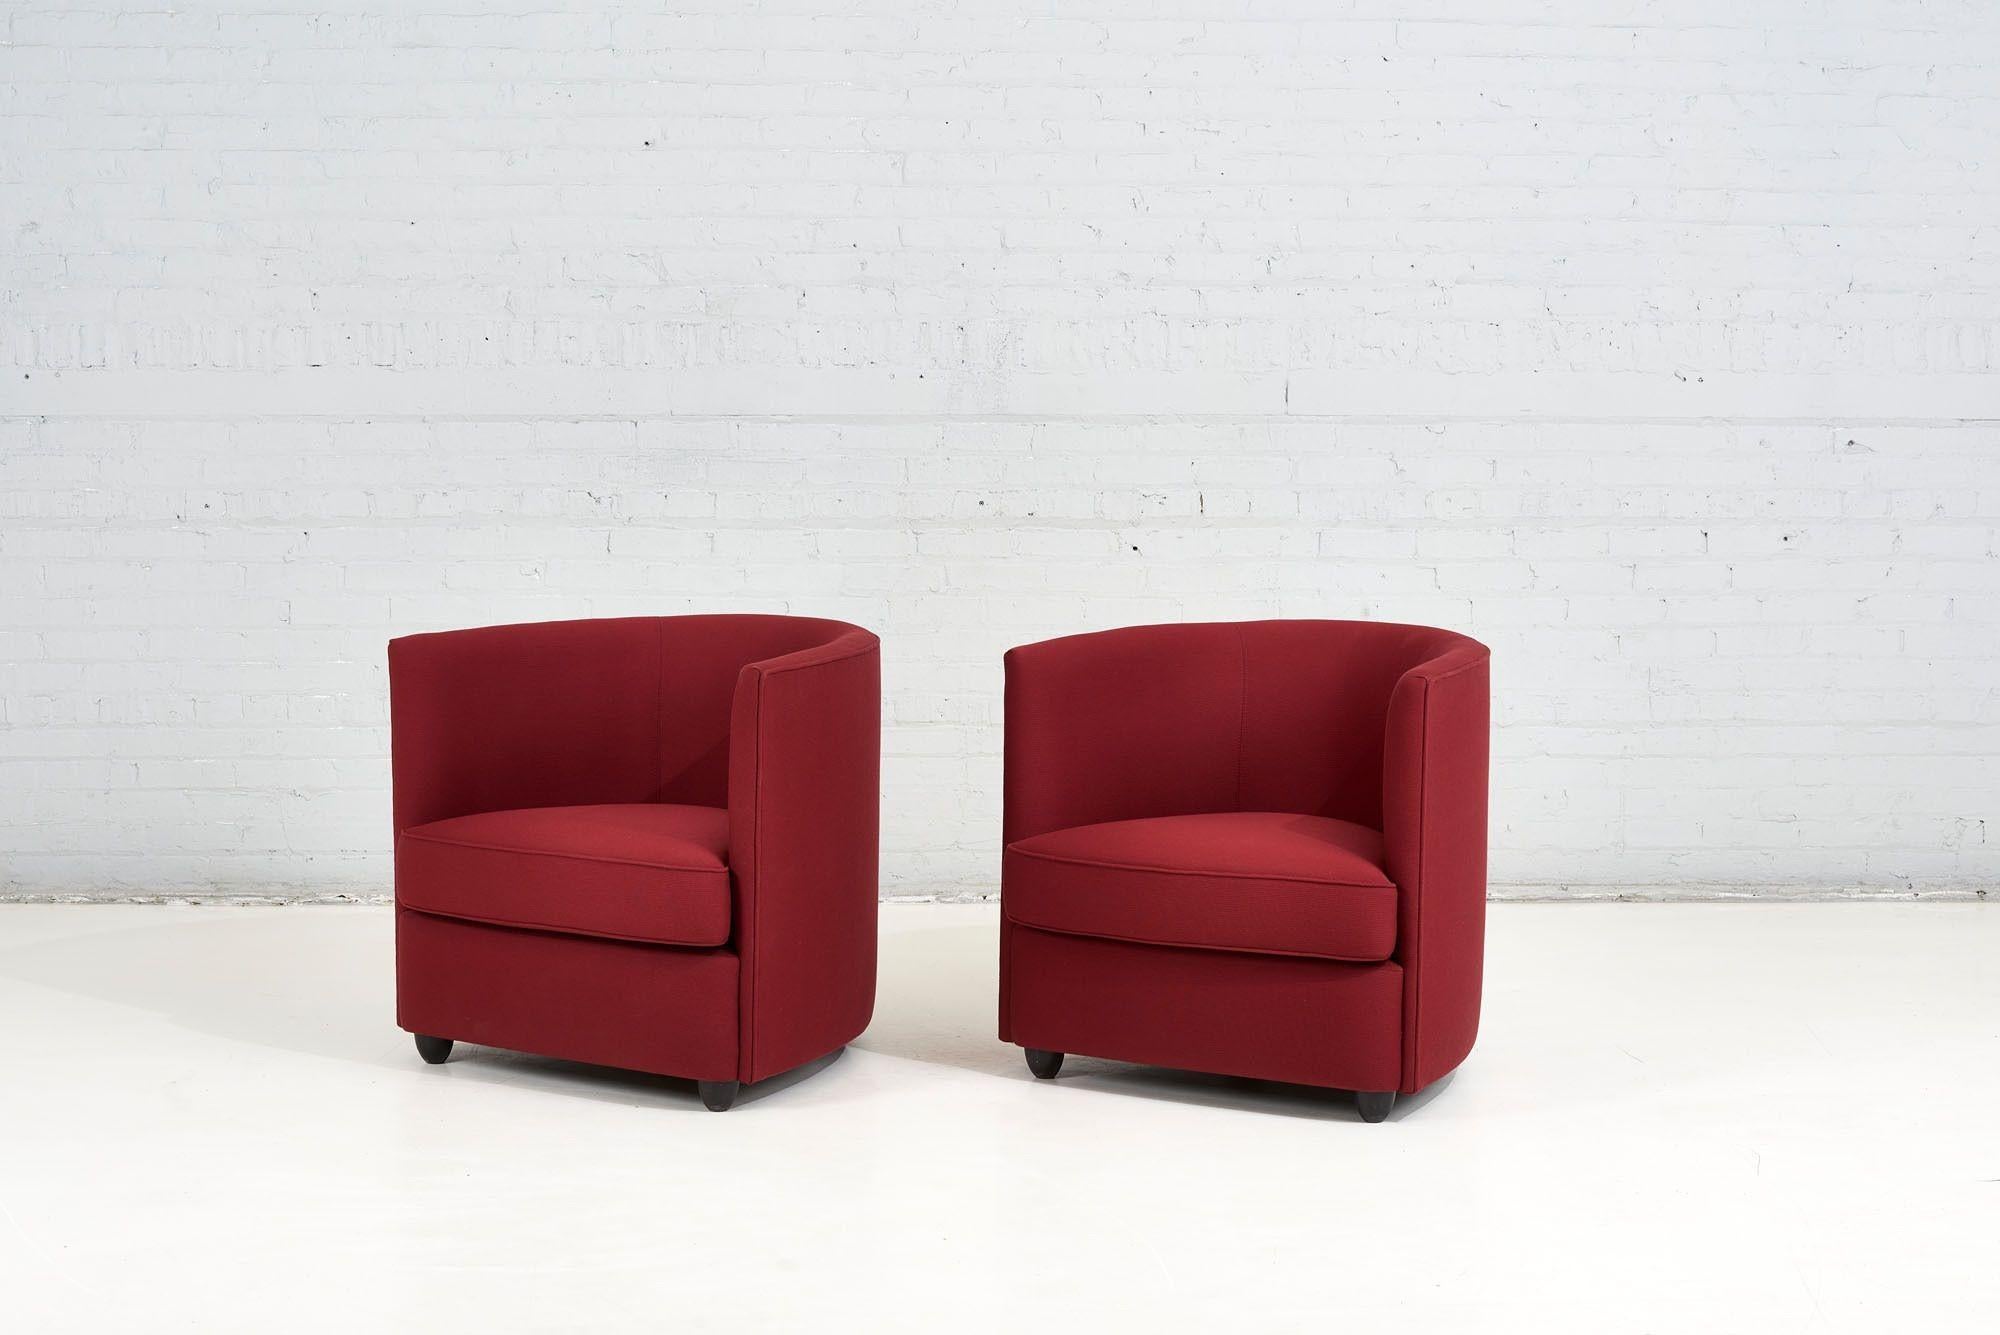 Post-Modern Andree Putman Pair Crescent Lounge Chair, 1980 For Sale